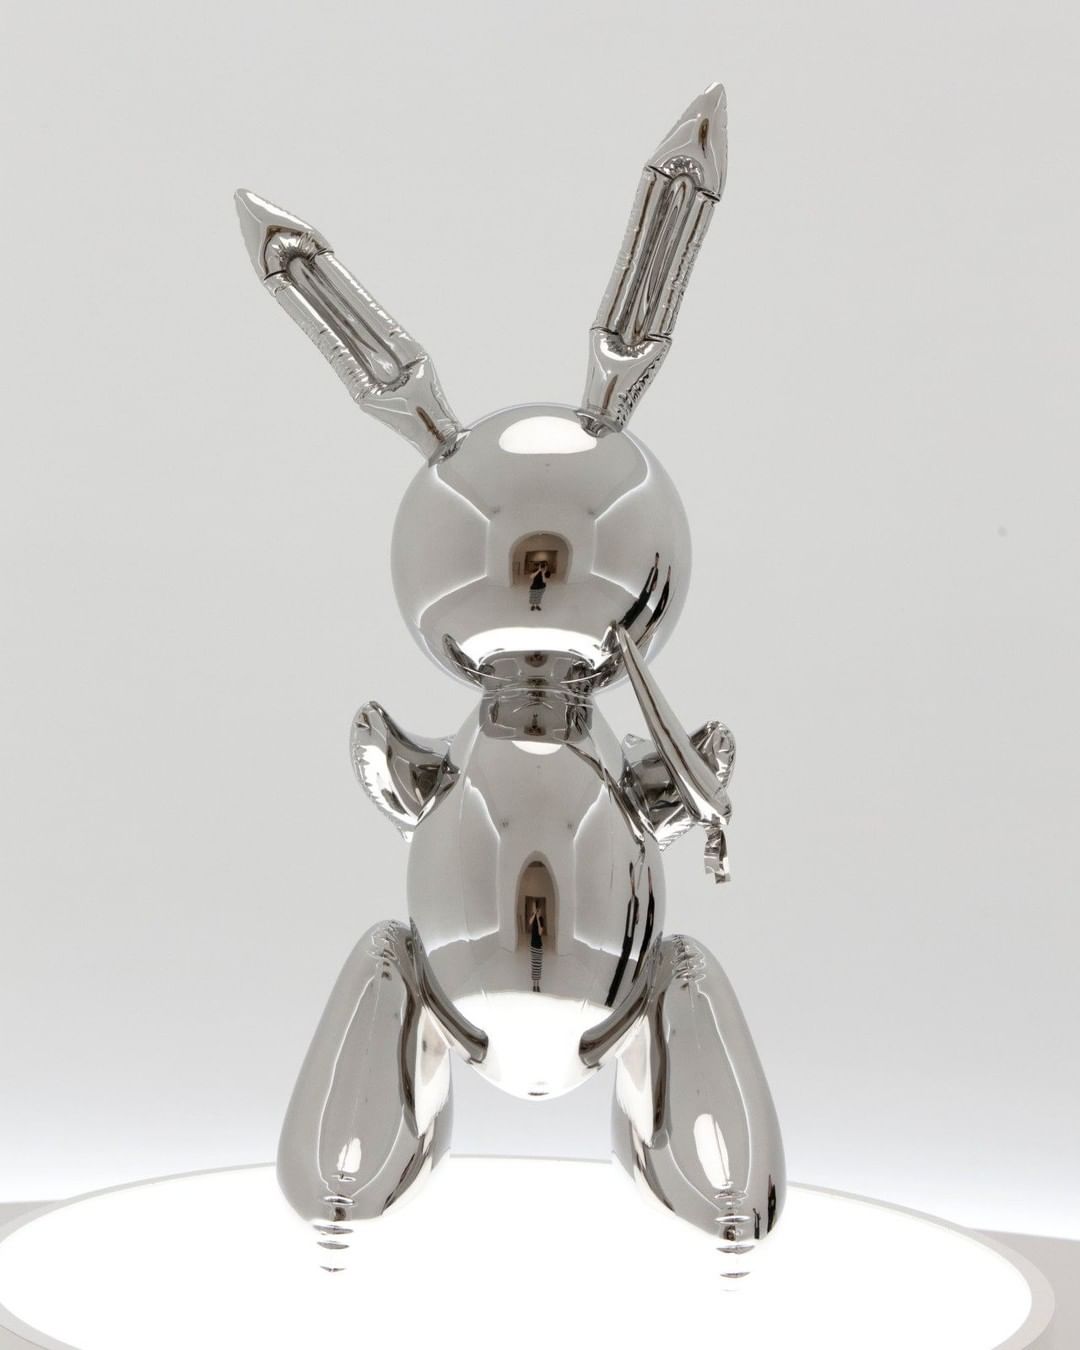 Jeff Koons, Rabbit, 1986 among the most expensive Artworks sold in 2019
